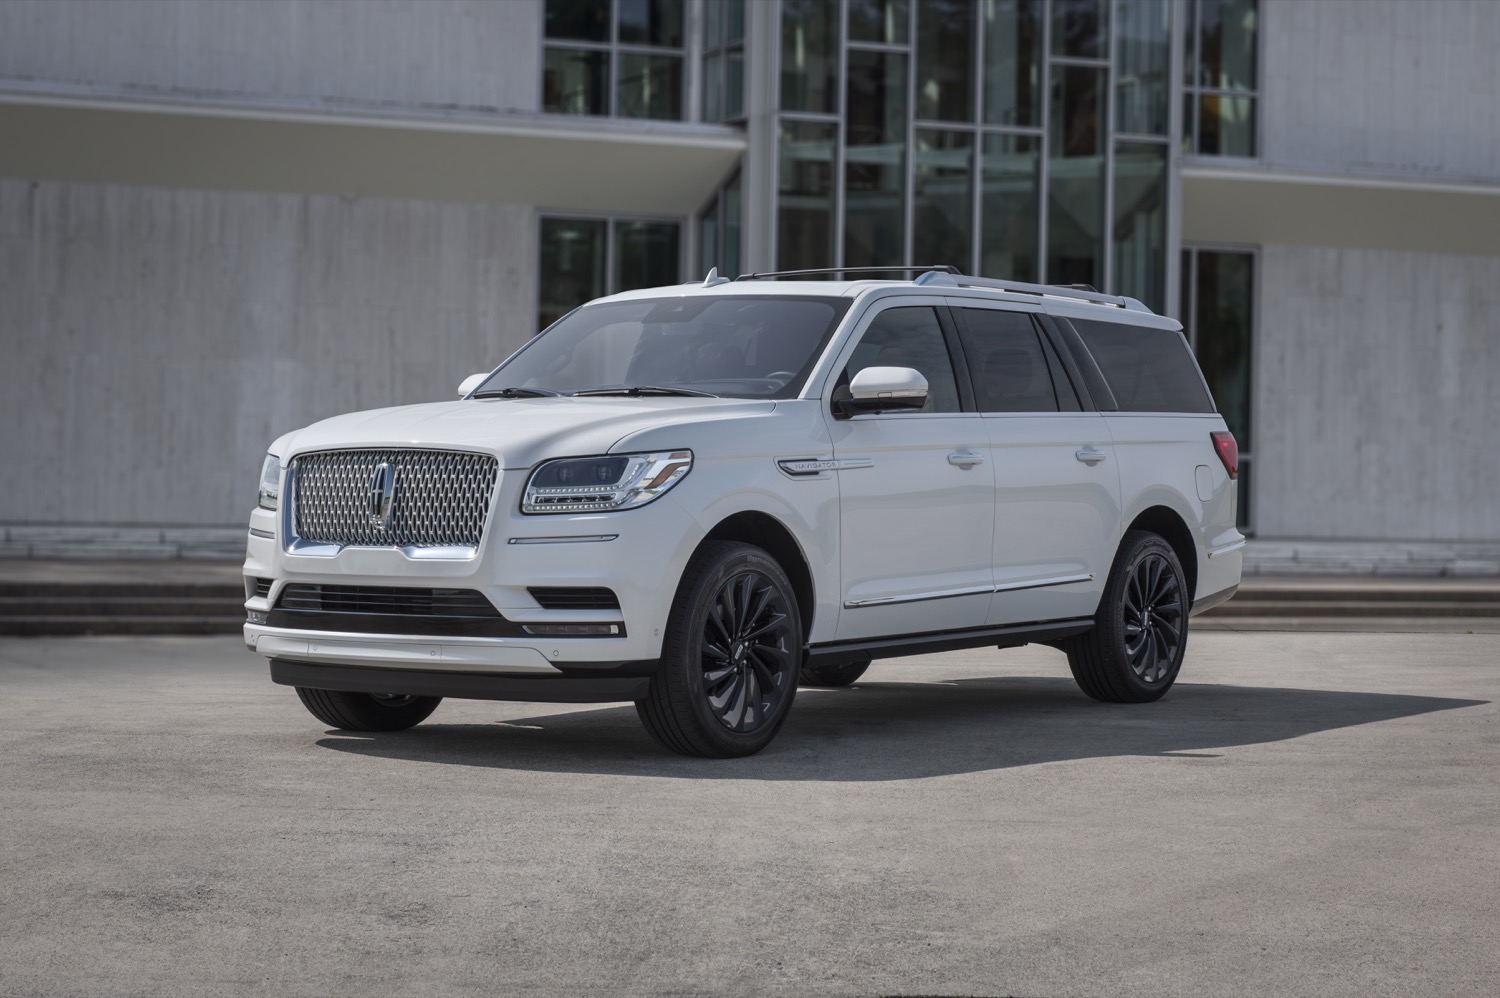 Lincoln Navigator Named Top Large Premium Suv In 2020 Apeal Study